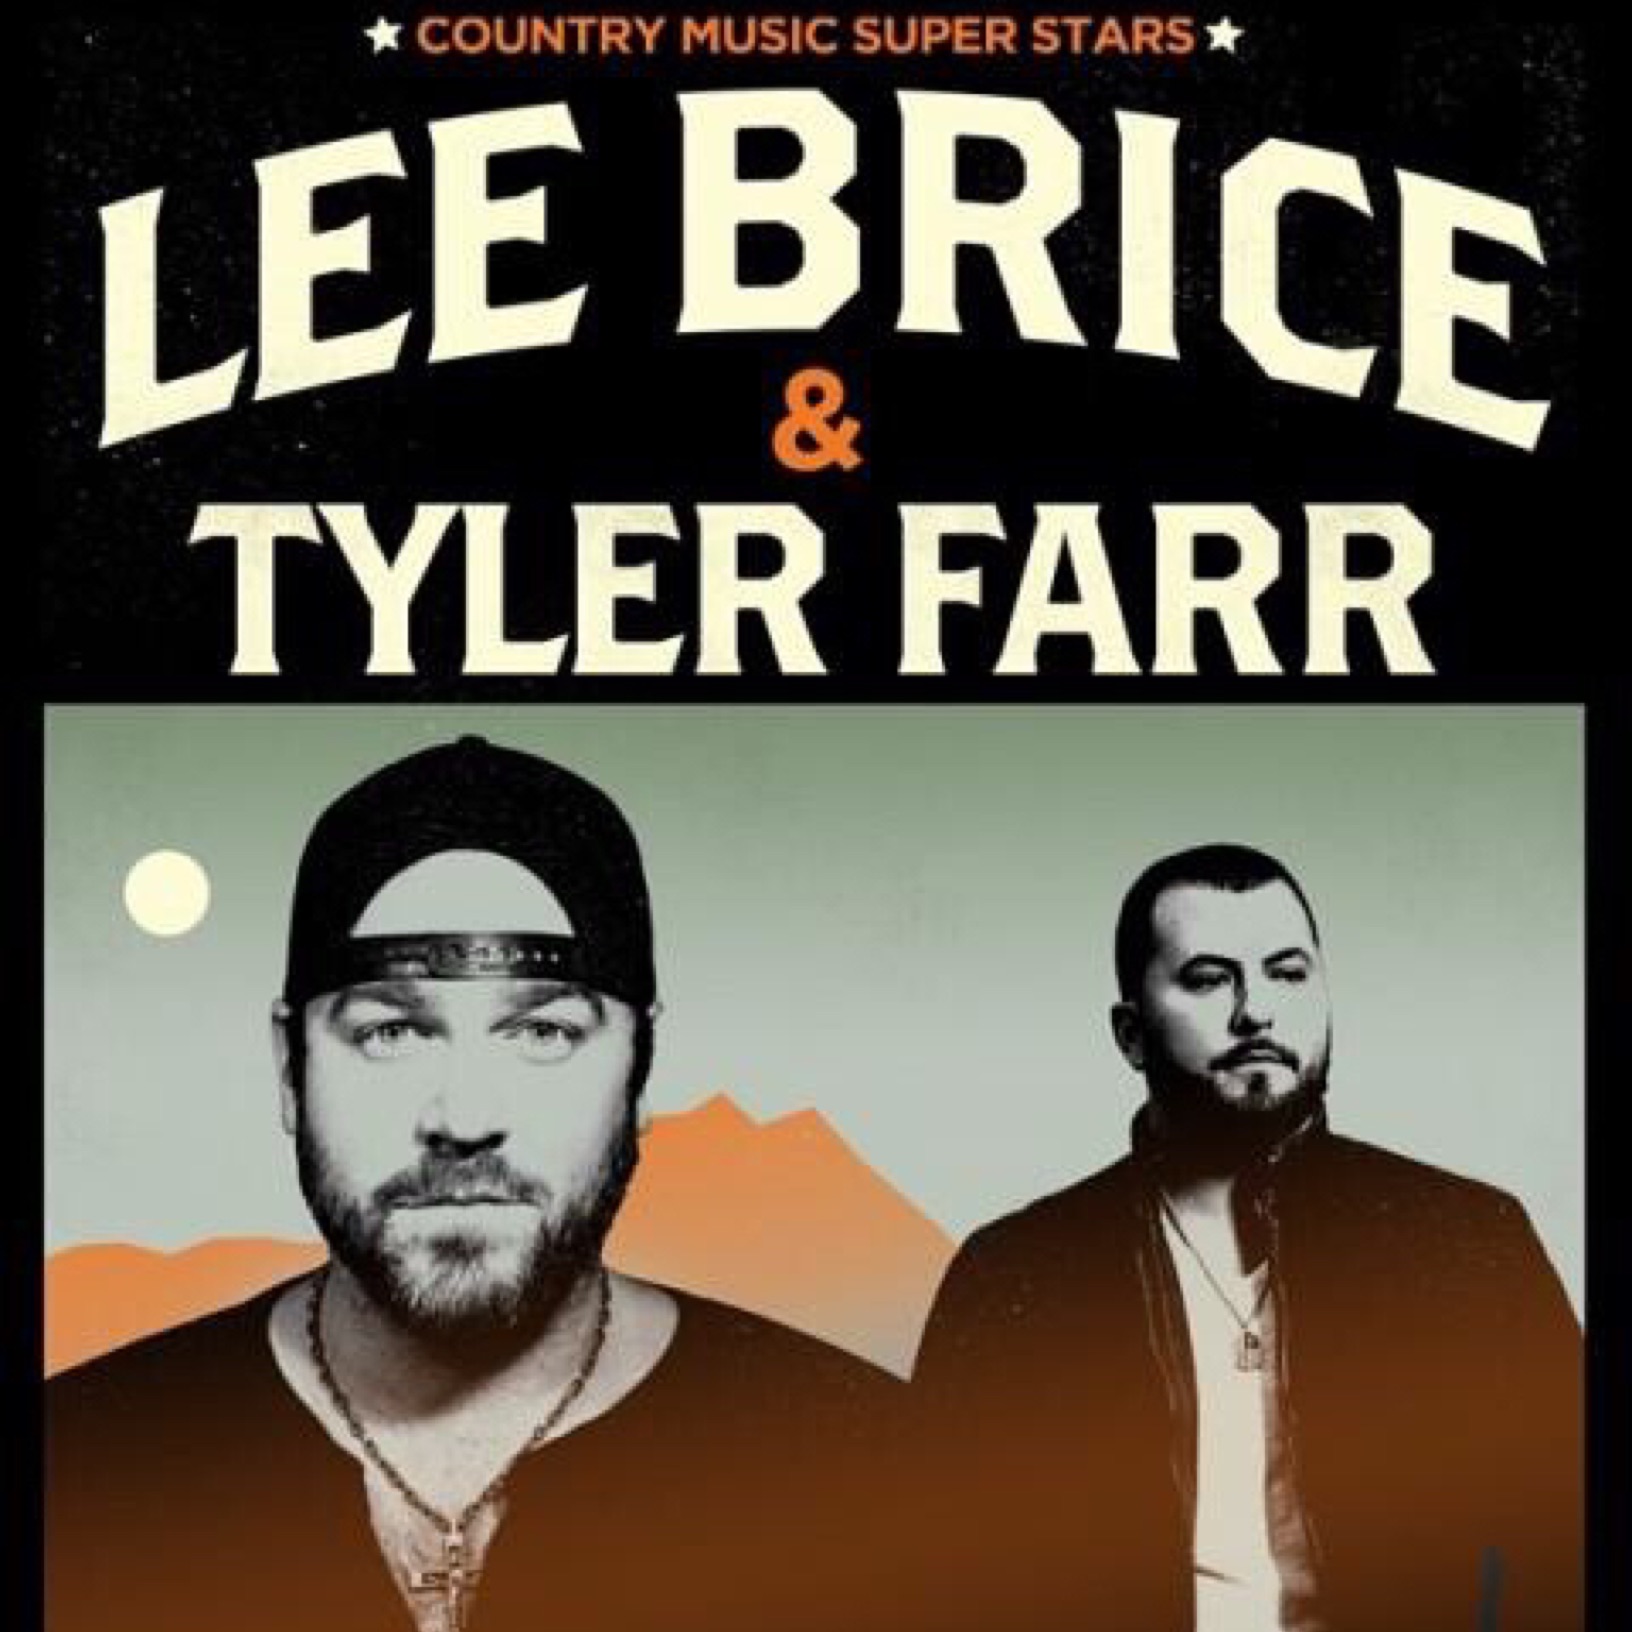 Lee Brice Announces "Life Off My Years" Tour with Tyler Farr Country